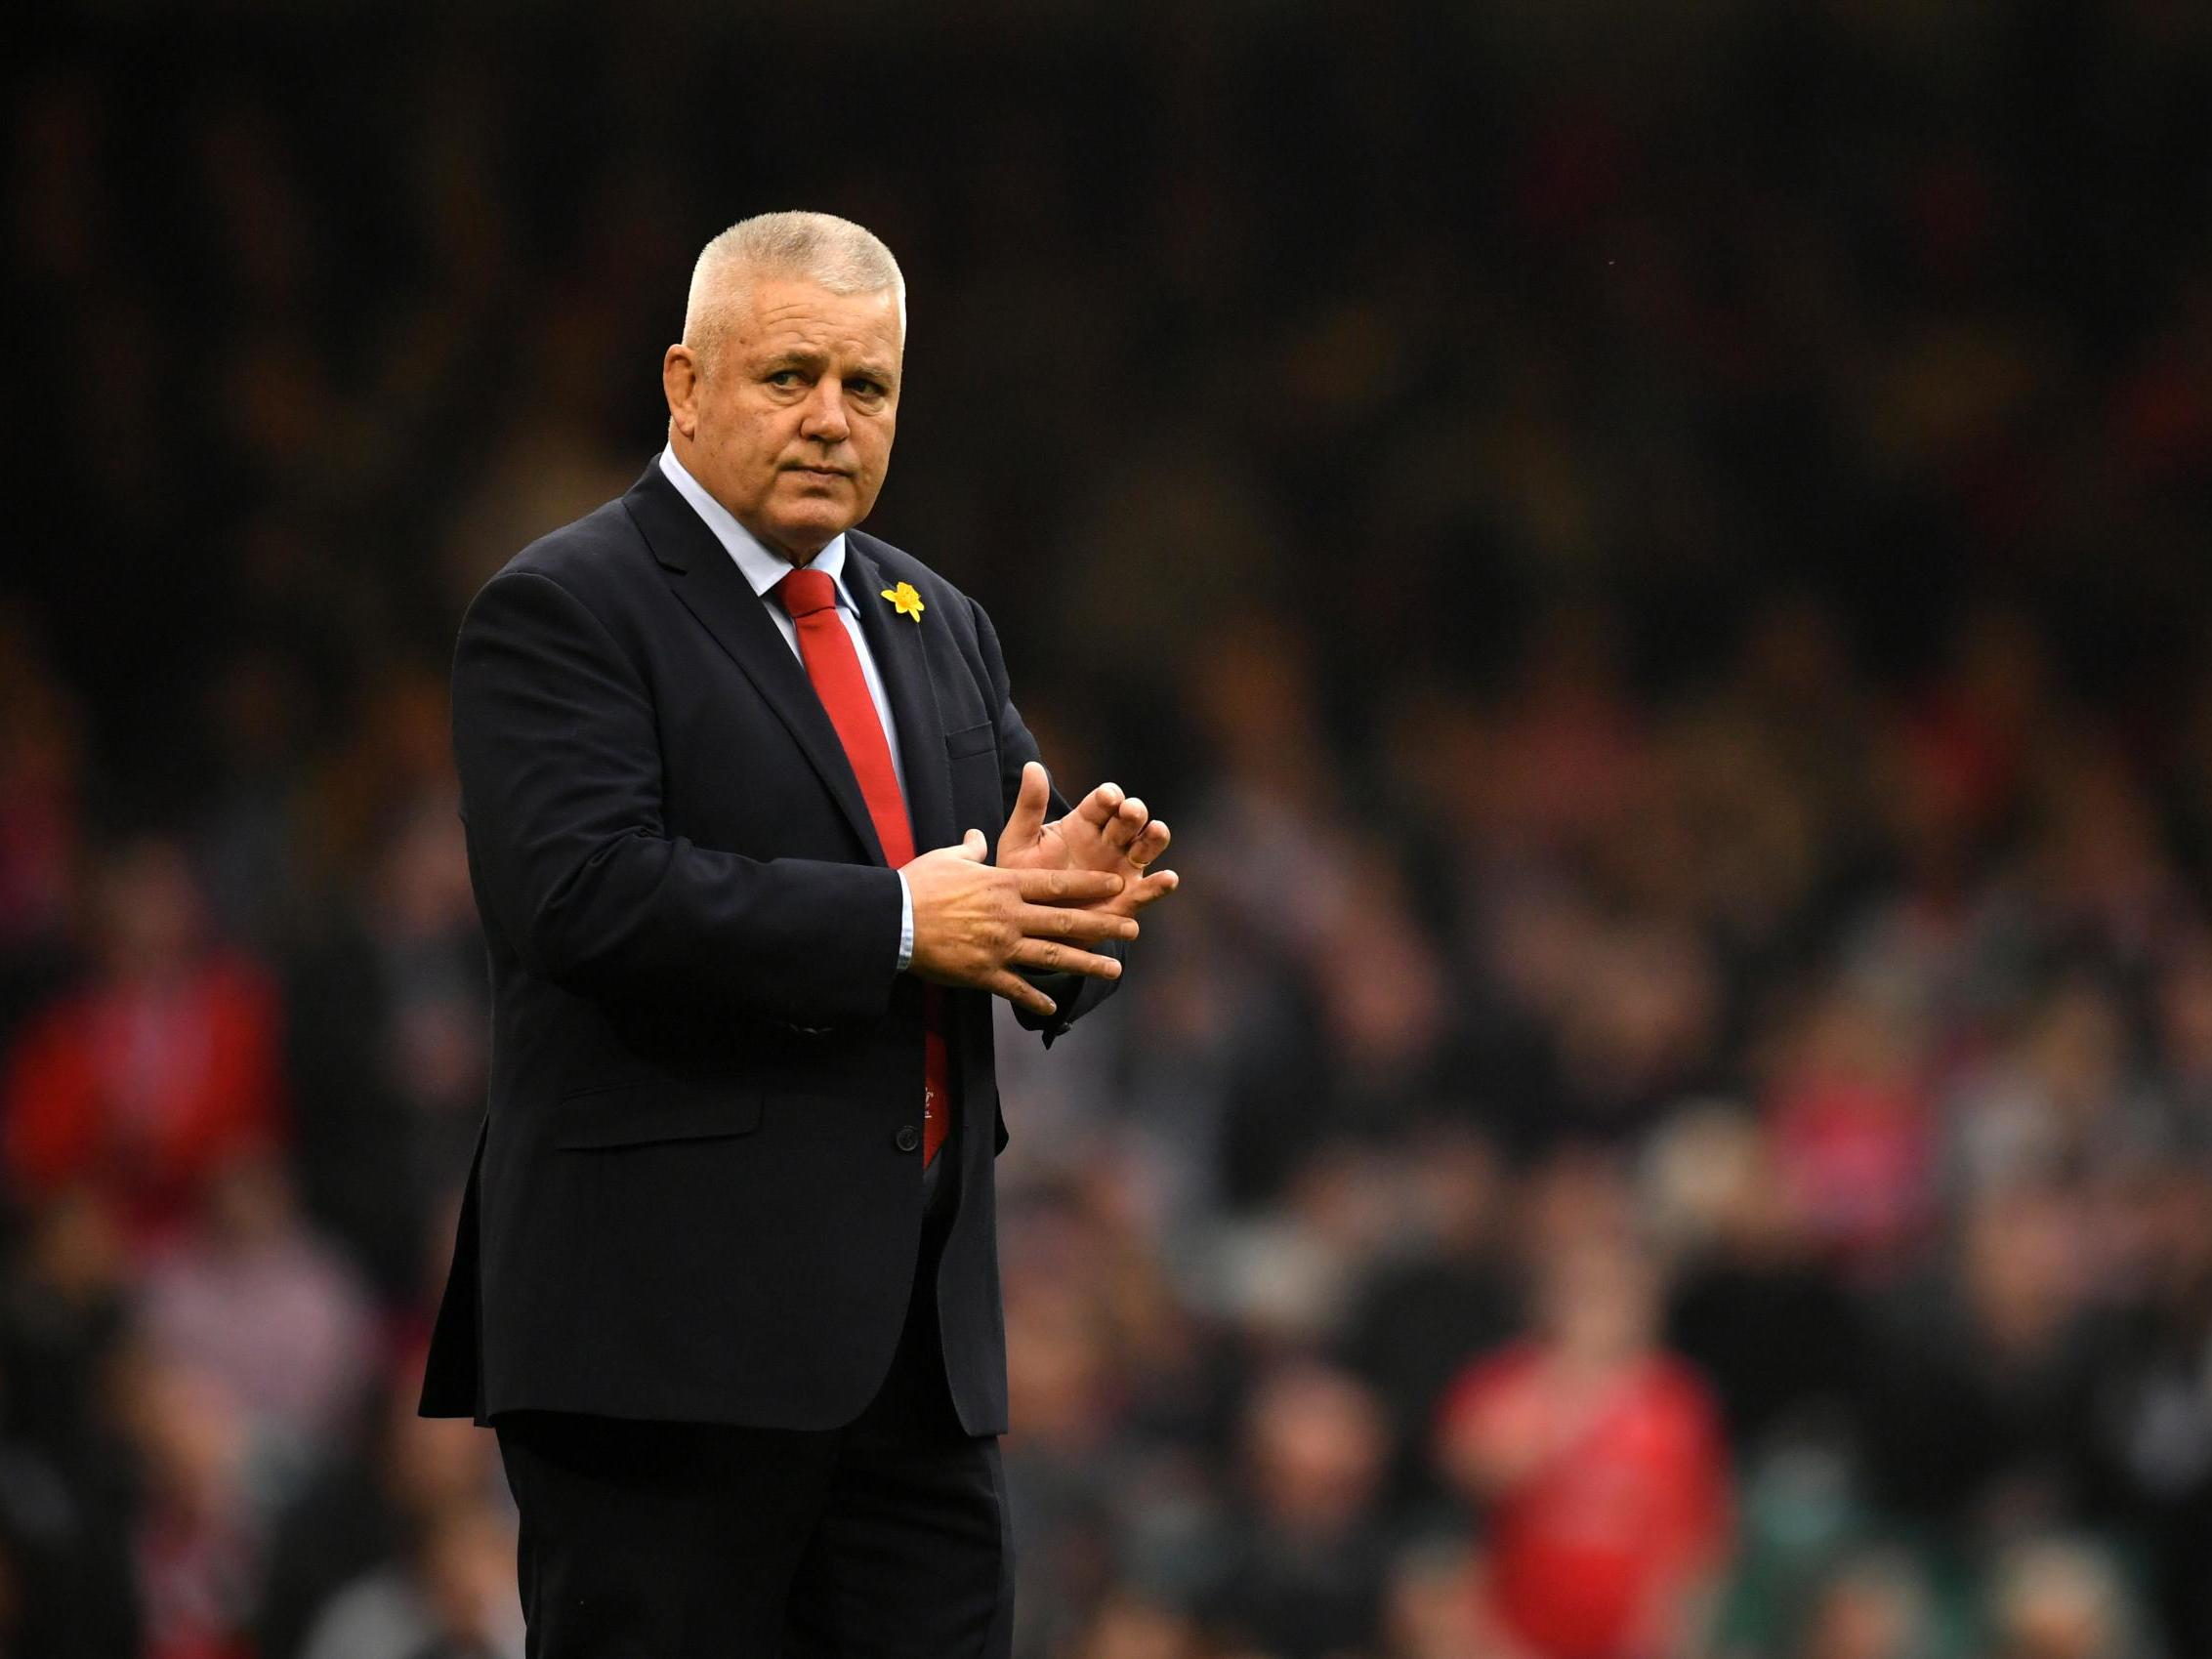 Gatland does not expect to take the England job if Eddie Jones leaves